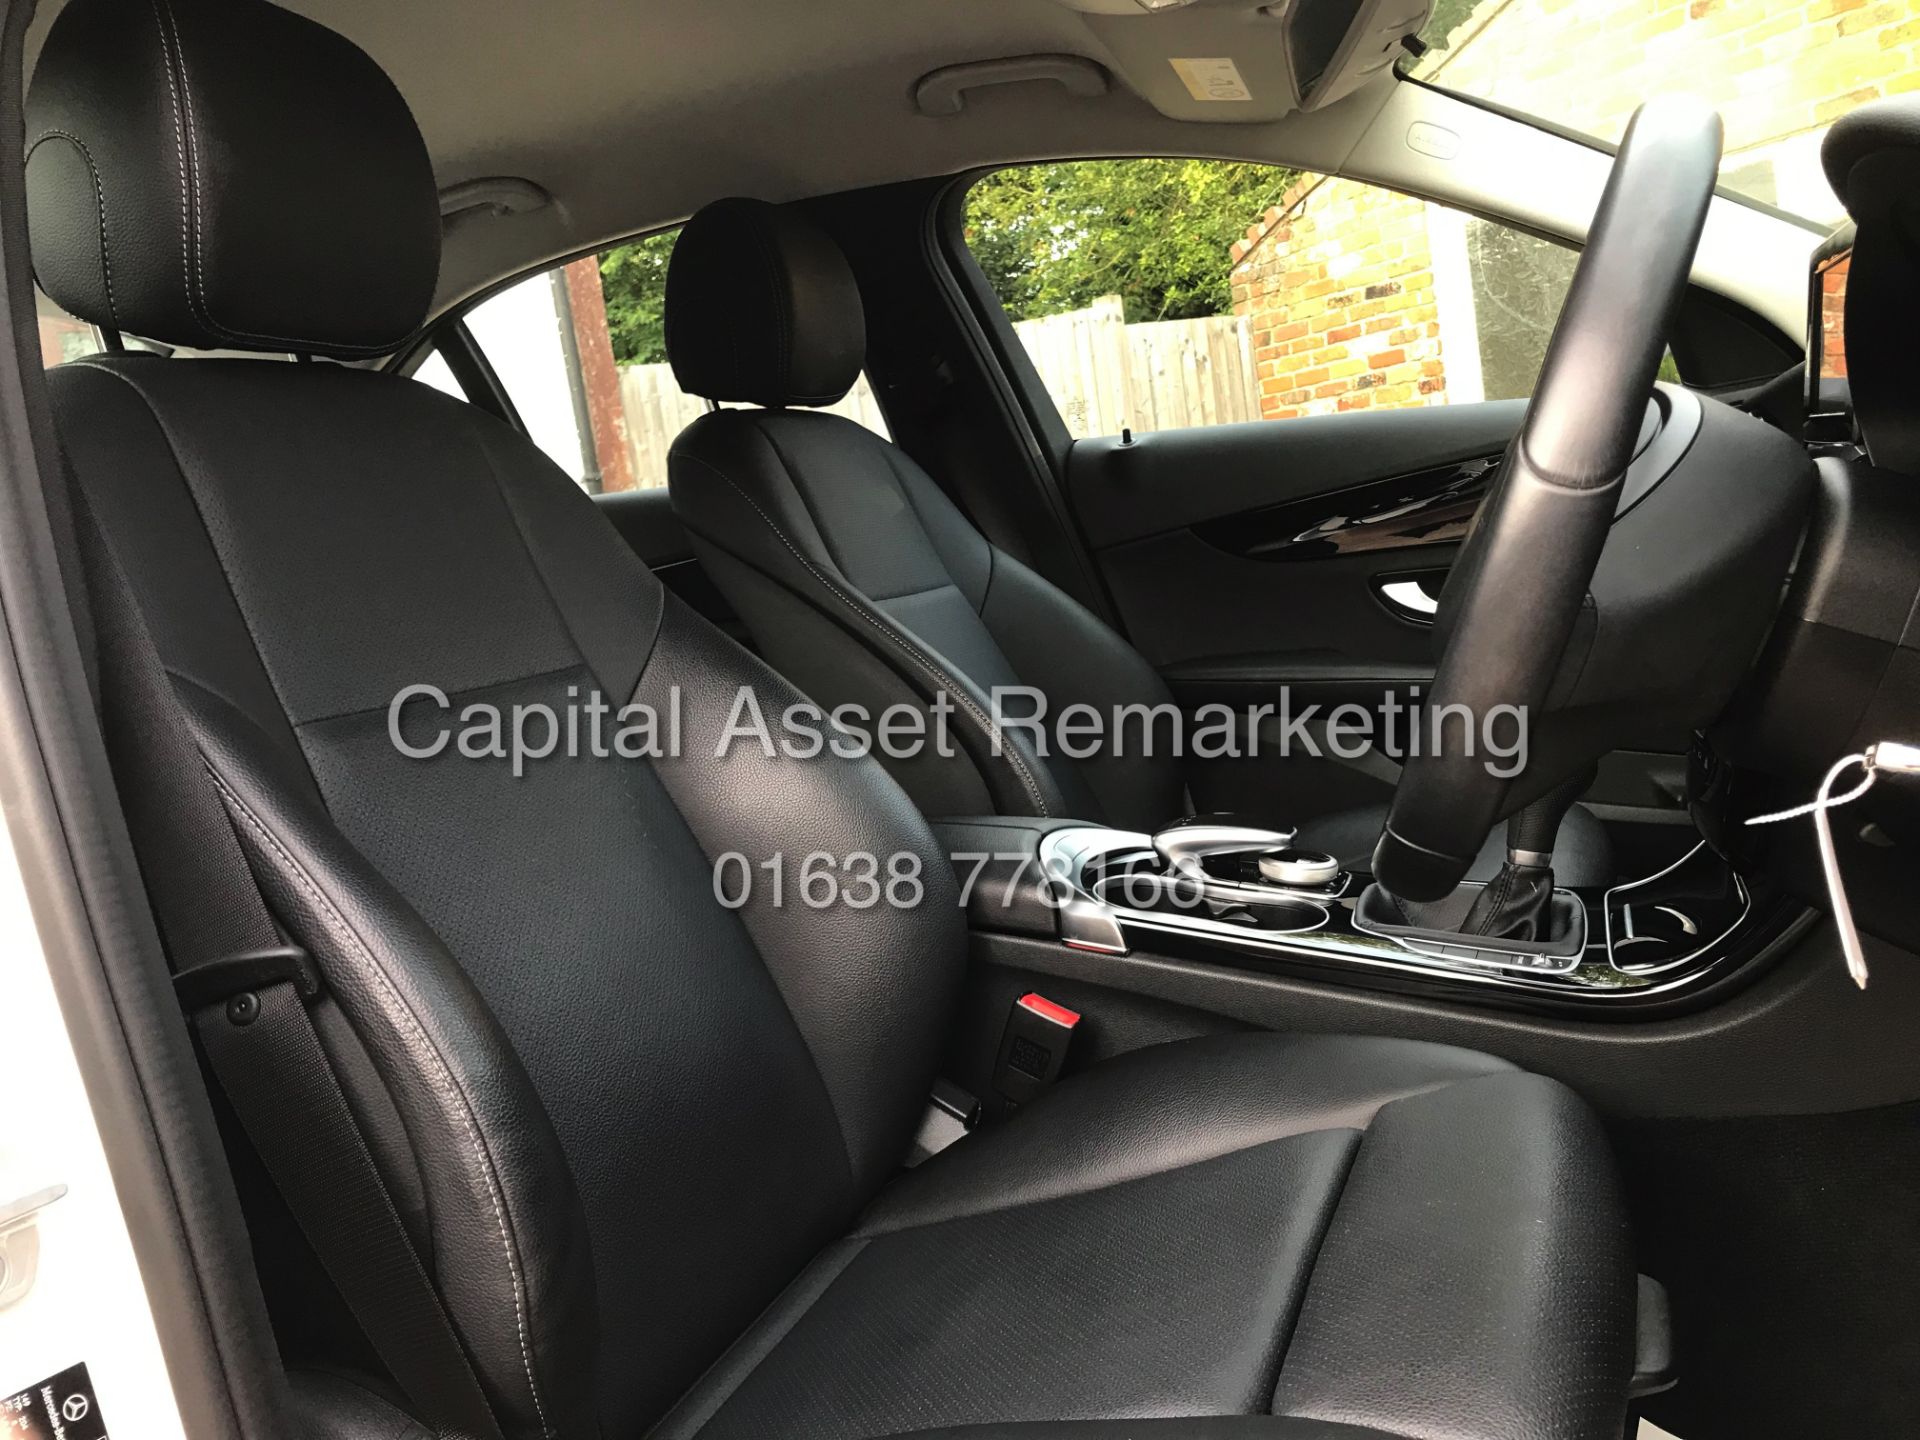 MERCEDES C200d "SPECIAL EQUIPMENT" 1 OWNER FSH (2016) LEATHER -AIR CON & CLIMATE *BEST COLOUR COMBO* - Image 8 of 19